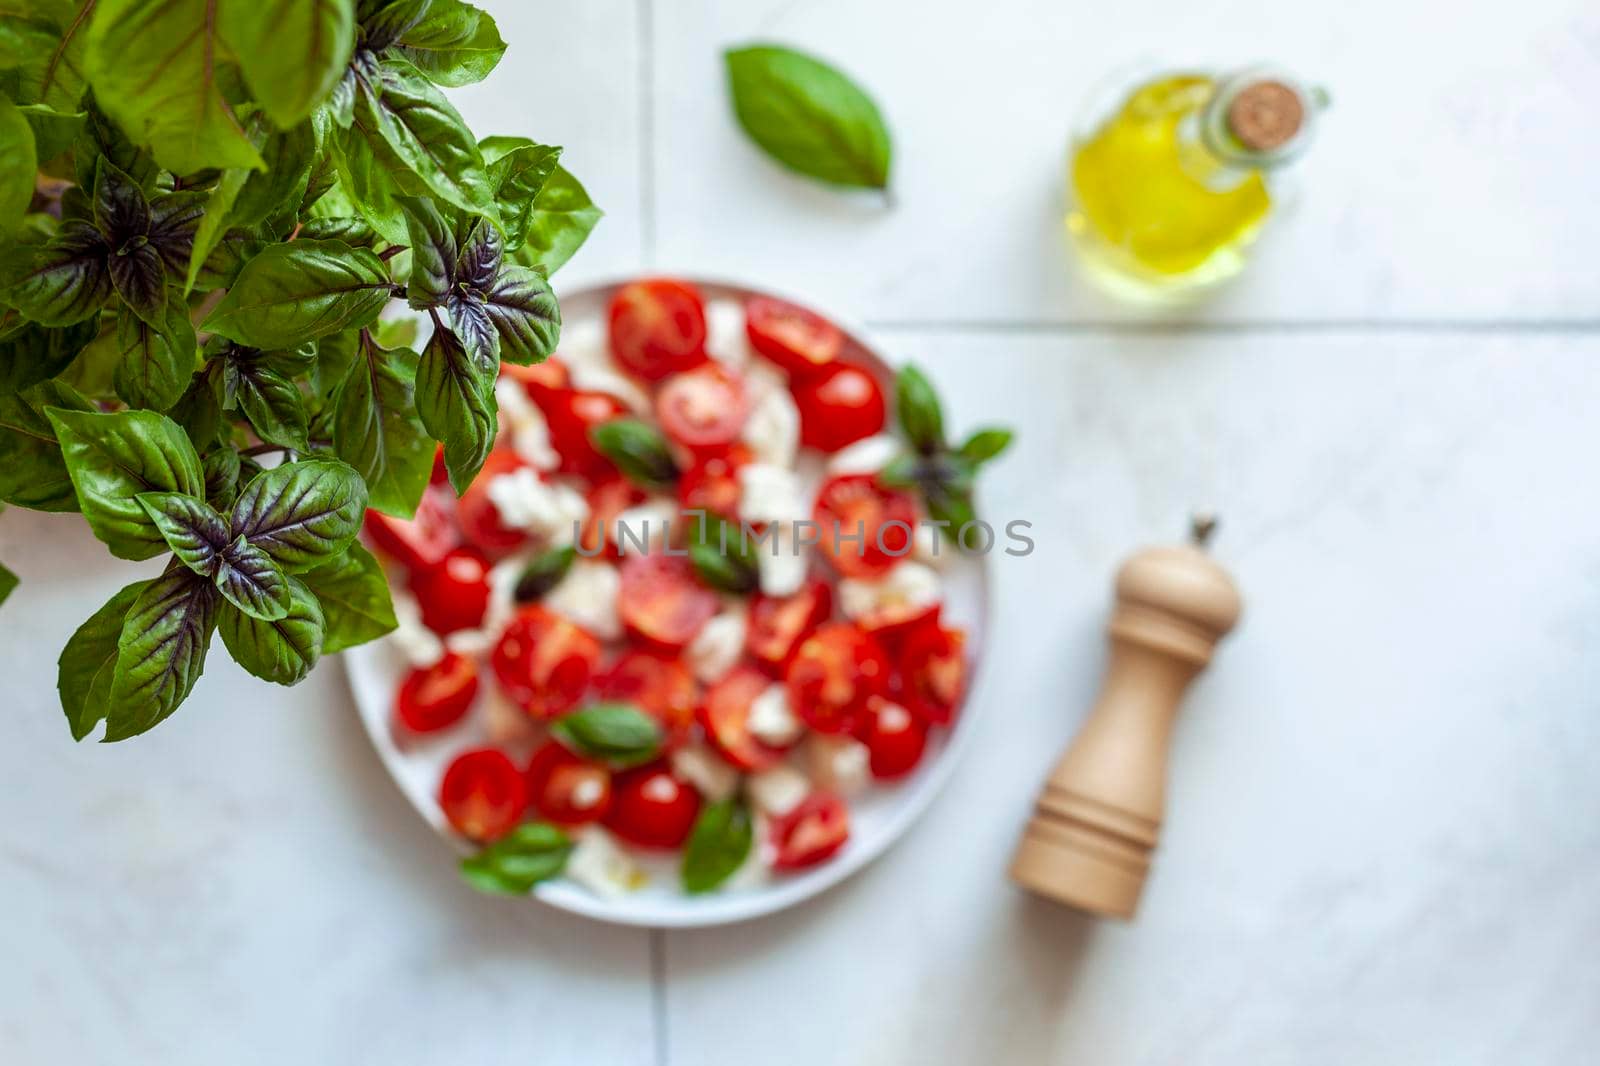 caprese salad served under the red, basil plant, home gardening concept, top view, focus on the basil plant